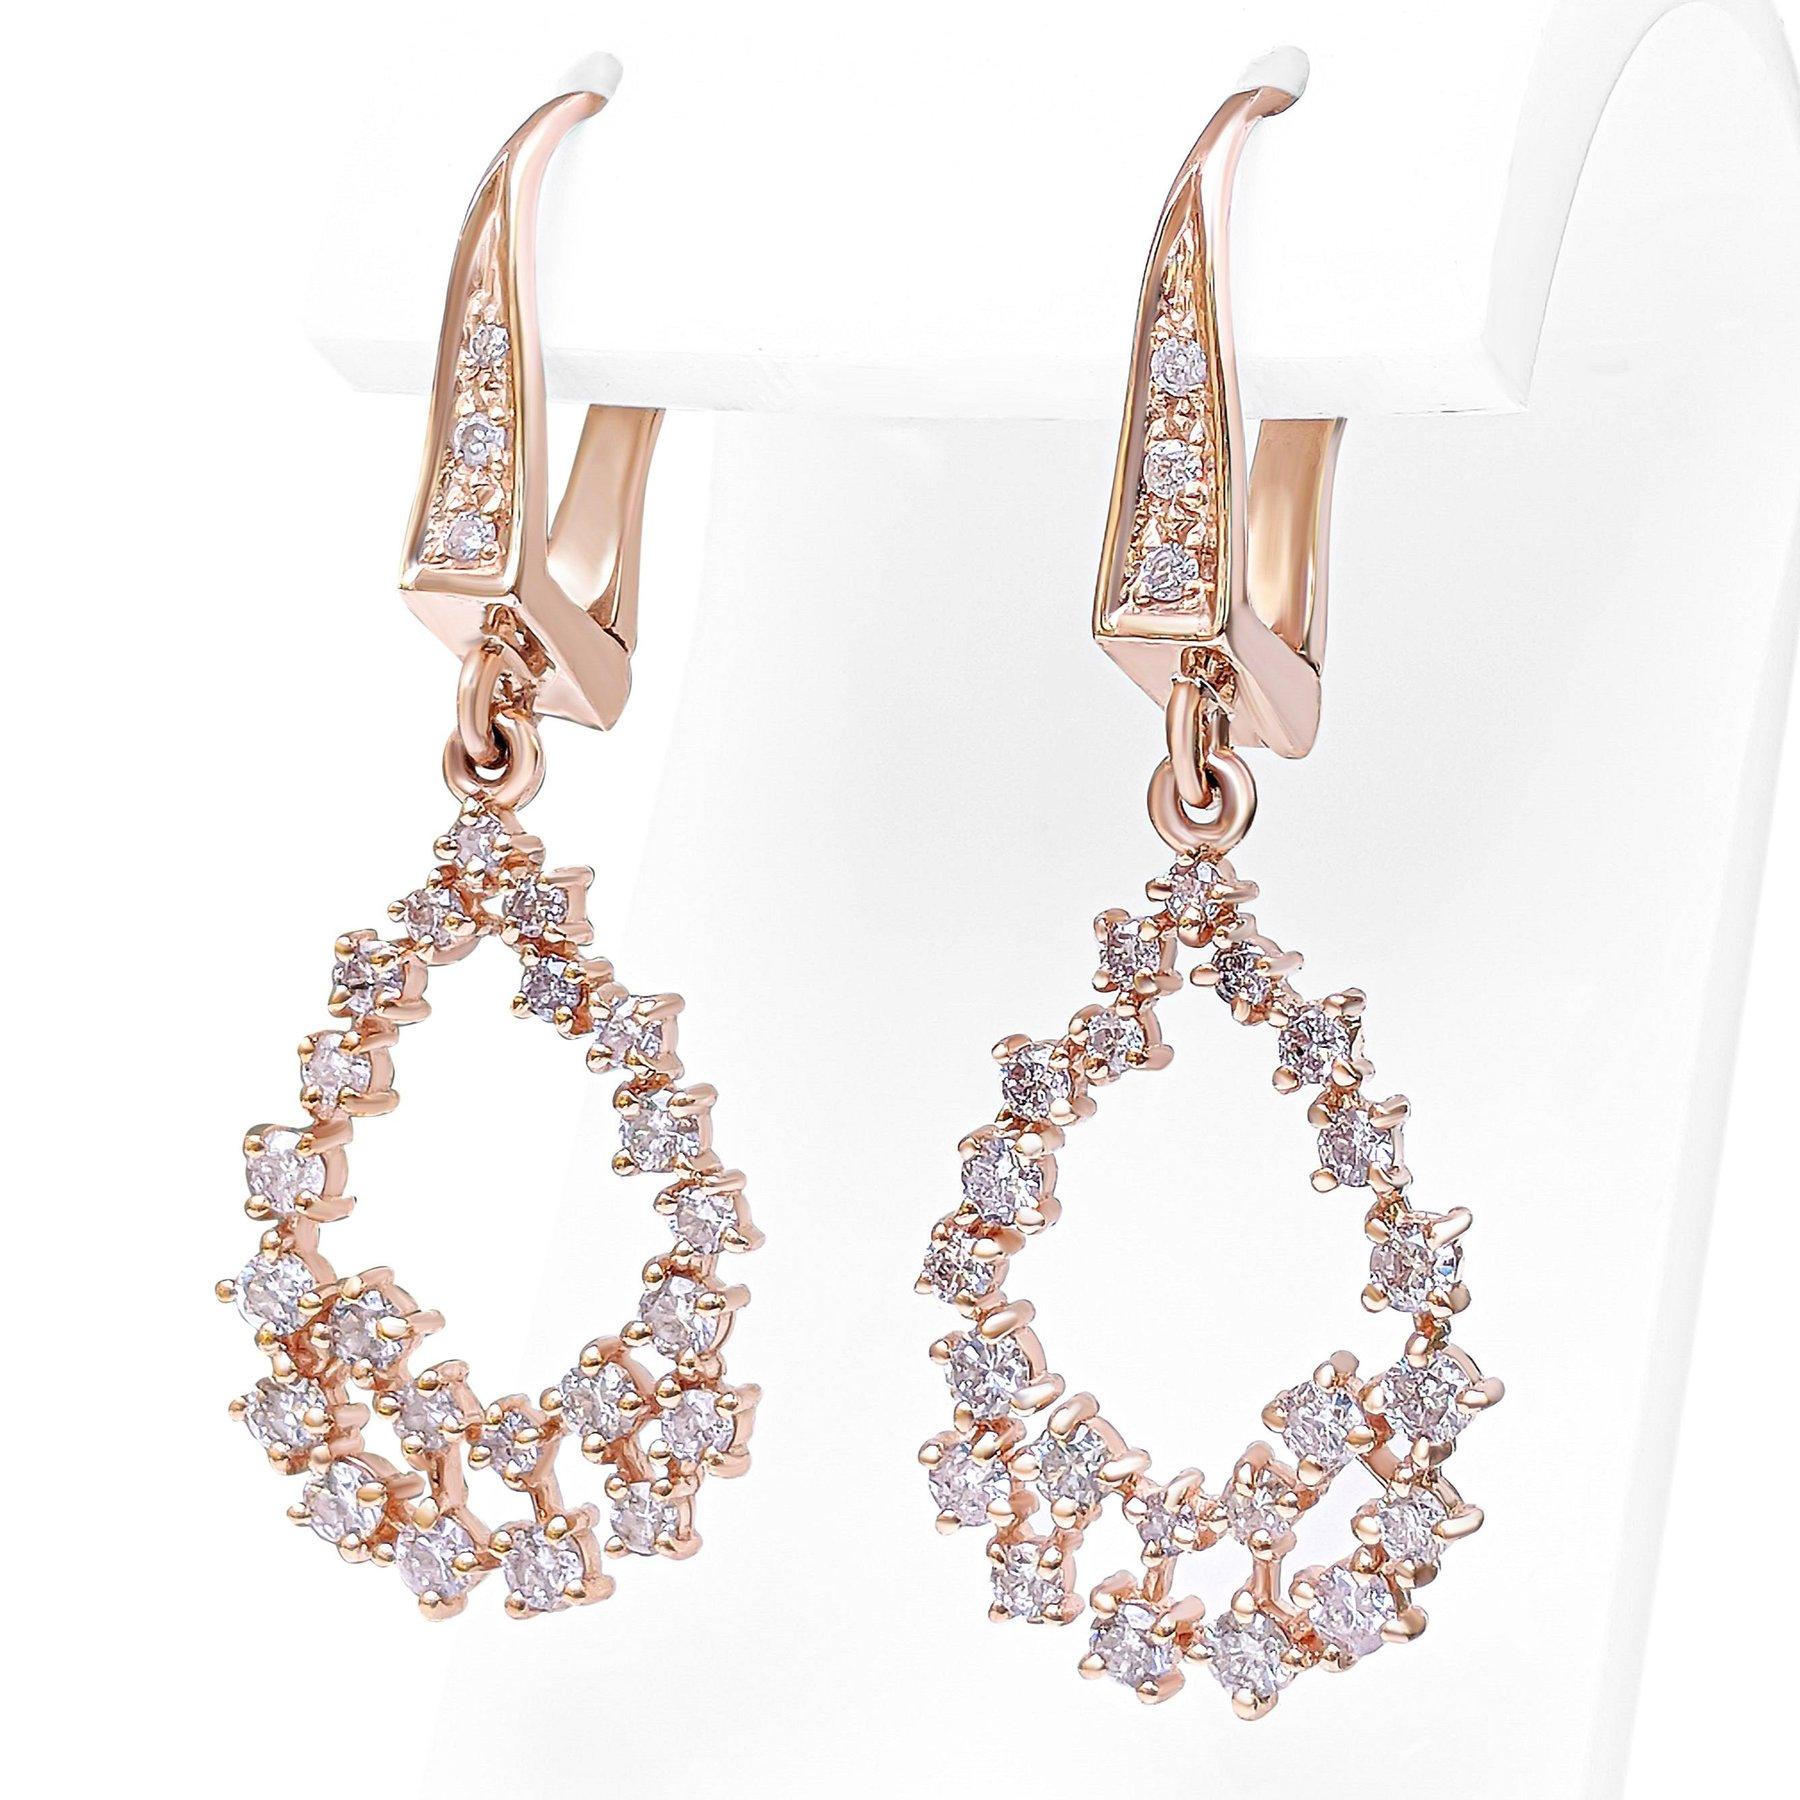 NO RESERVE! 1.05Cttw Fancy Pink Diamonds - 14 kt. Rose gold - Earrings In New Condition For Sale In Ramat Gan, IL